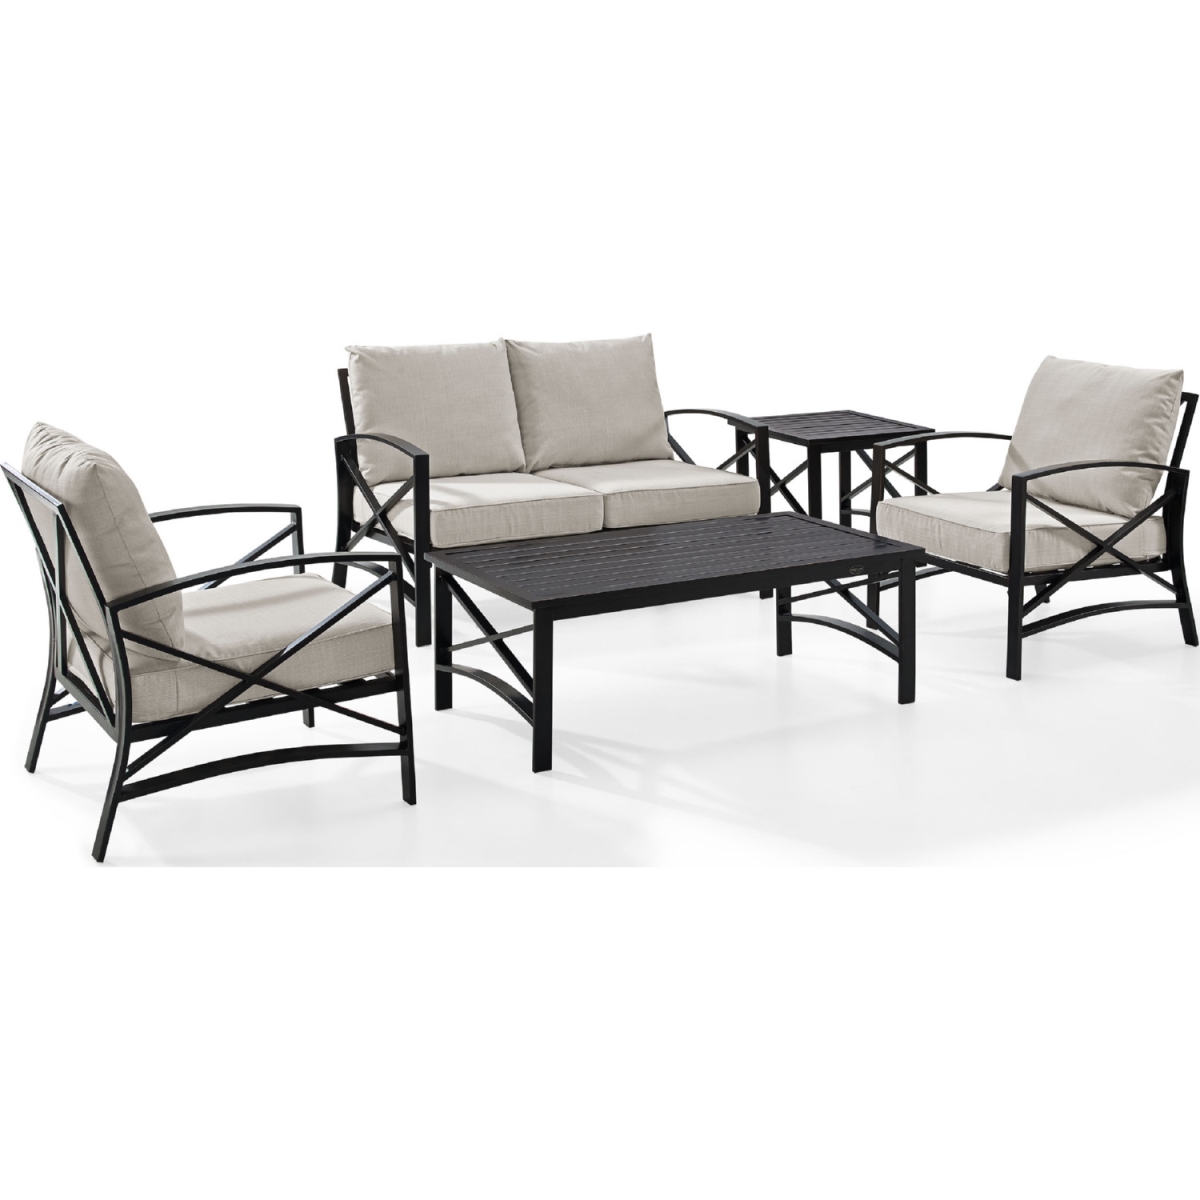 Ko60015bz-ol 5 Piece Kaplan Outdoor Seating Set With Oatmeal Cushion - Loveseat, Two Chairs, Coffee Table, Side Table